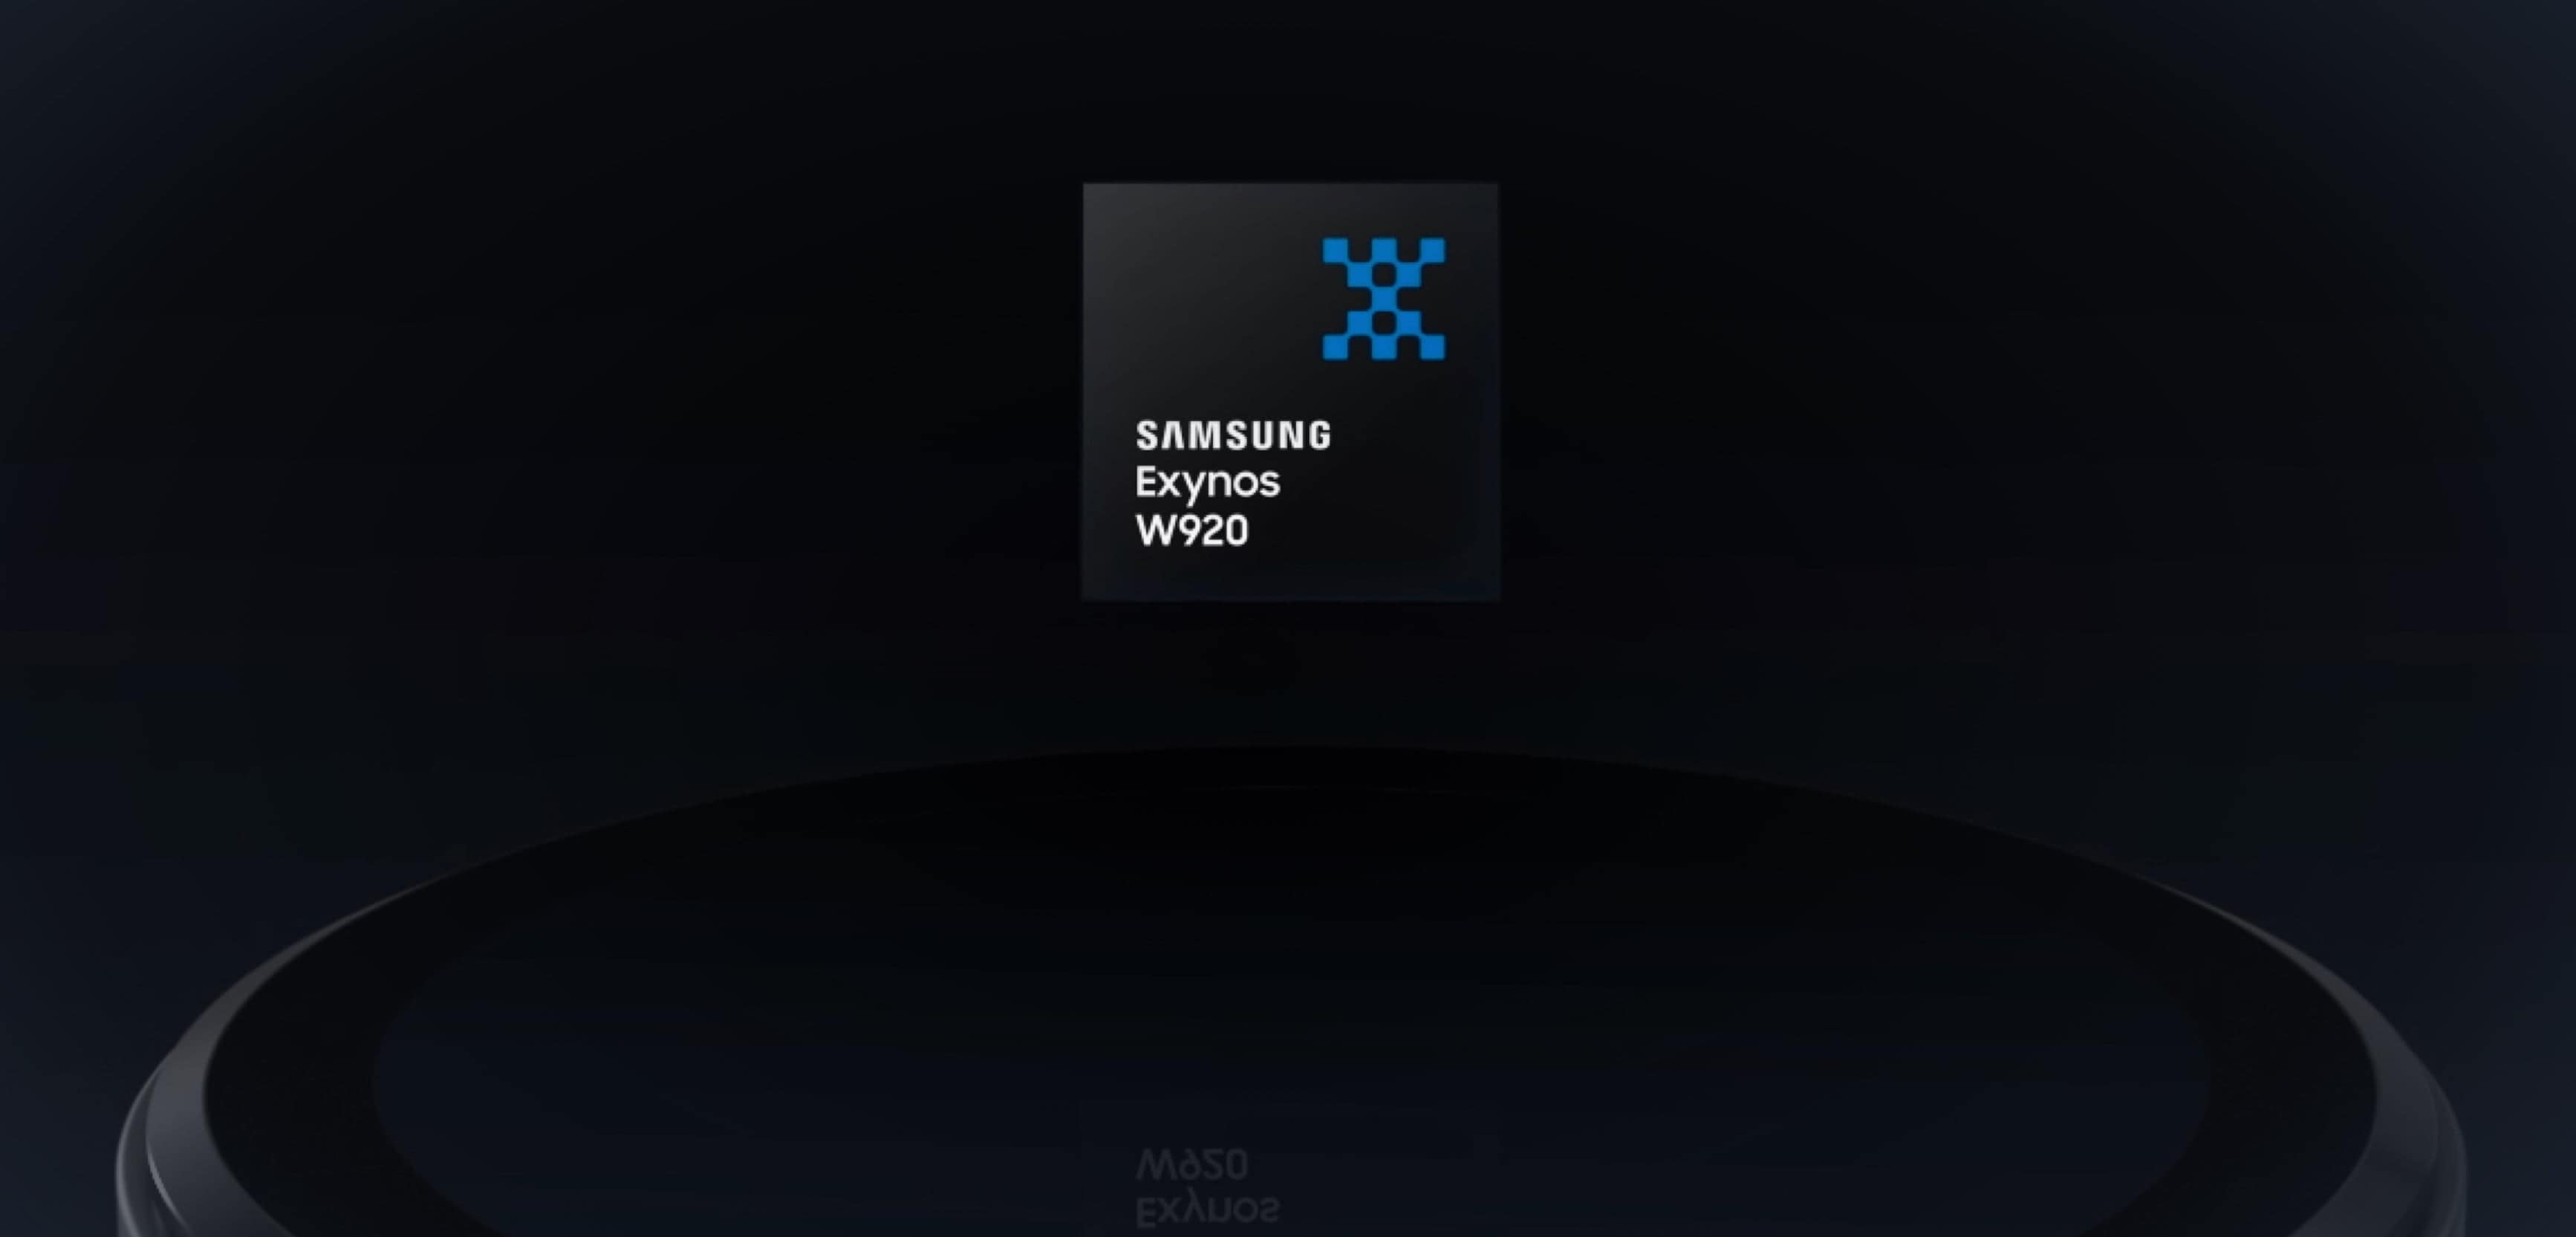 The Samsung Exynos W920 utilizes a 5-nanometer (nm) extreme ultraviolet (EUV) process node, enhancing efficiency for next-generation wearable devices.